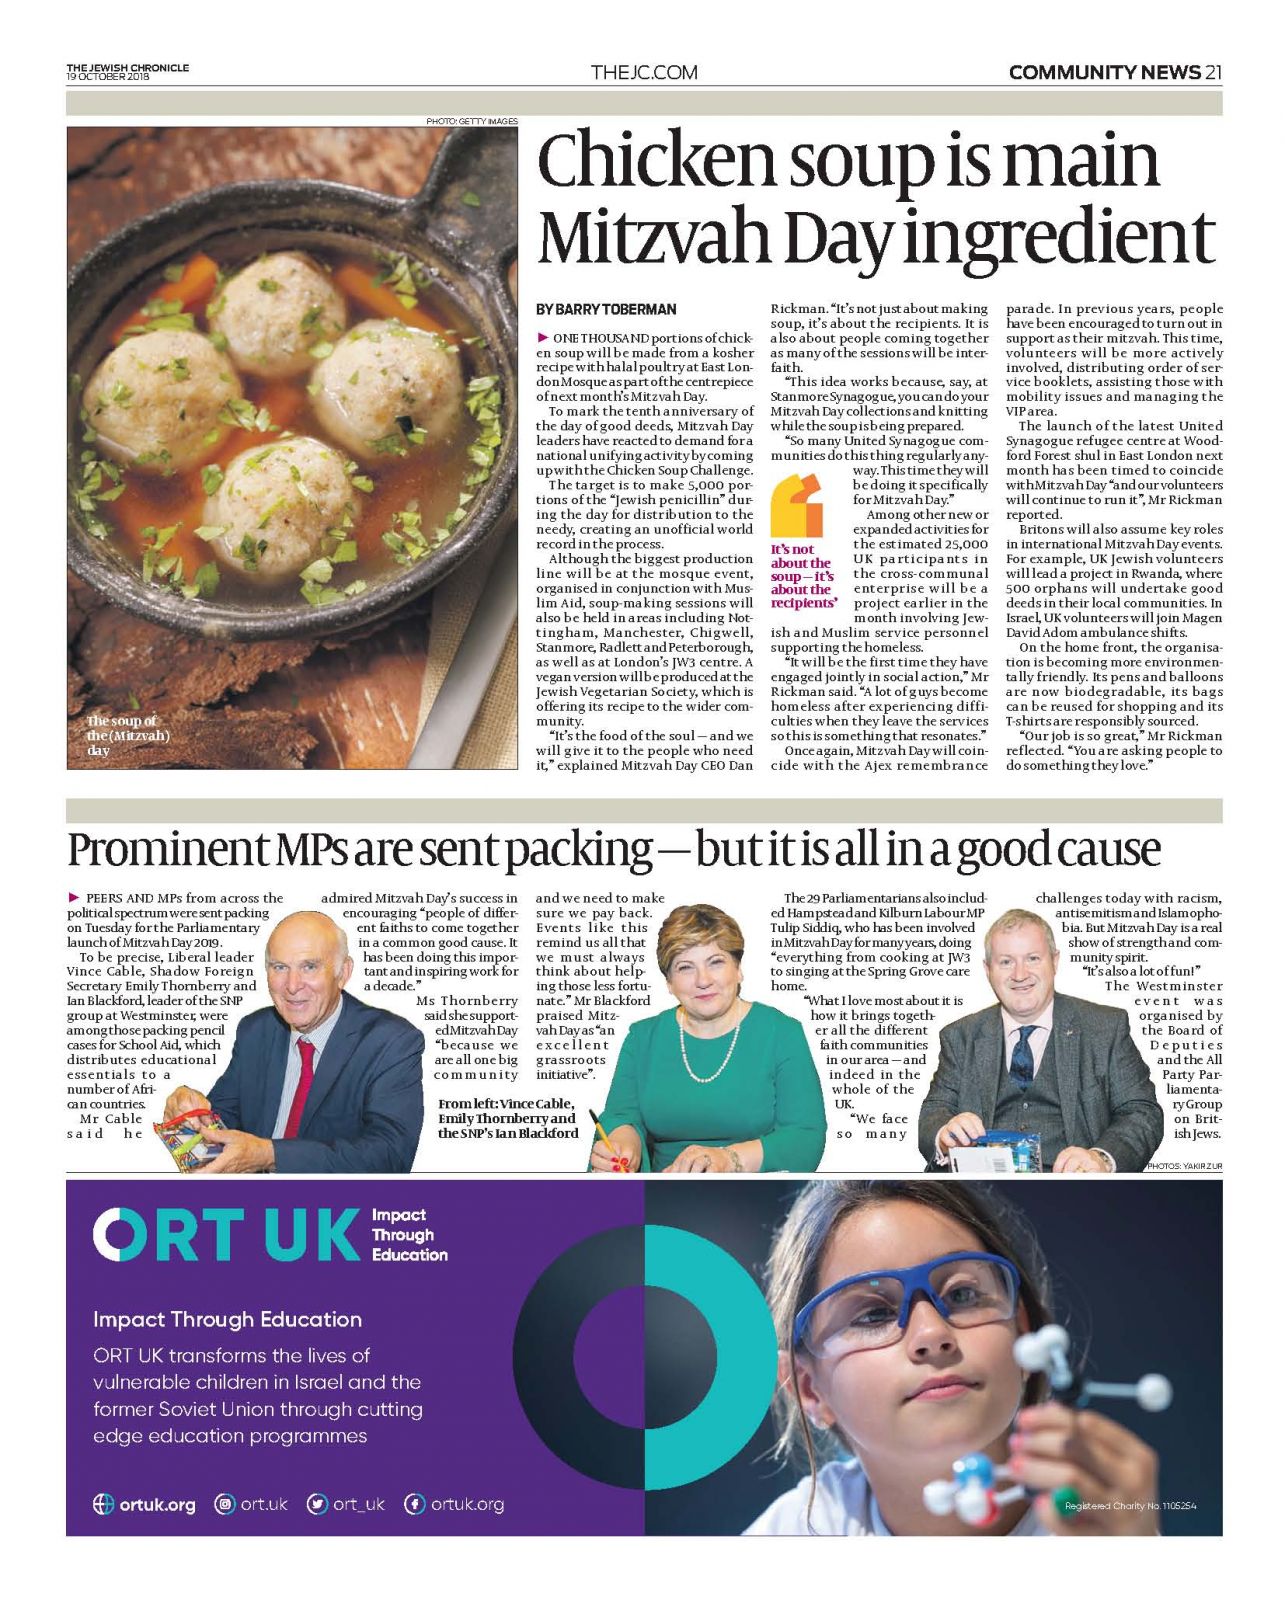 Mitzvah Day preview in the Jewish Chronicle